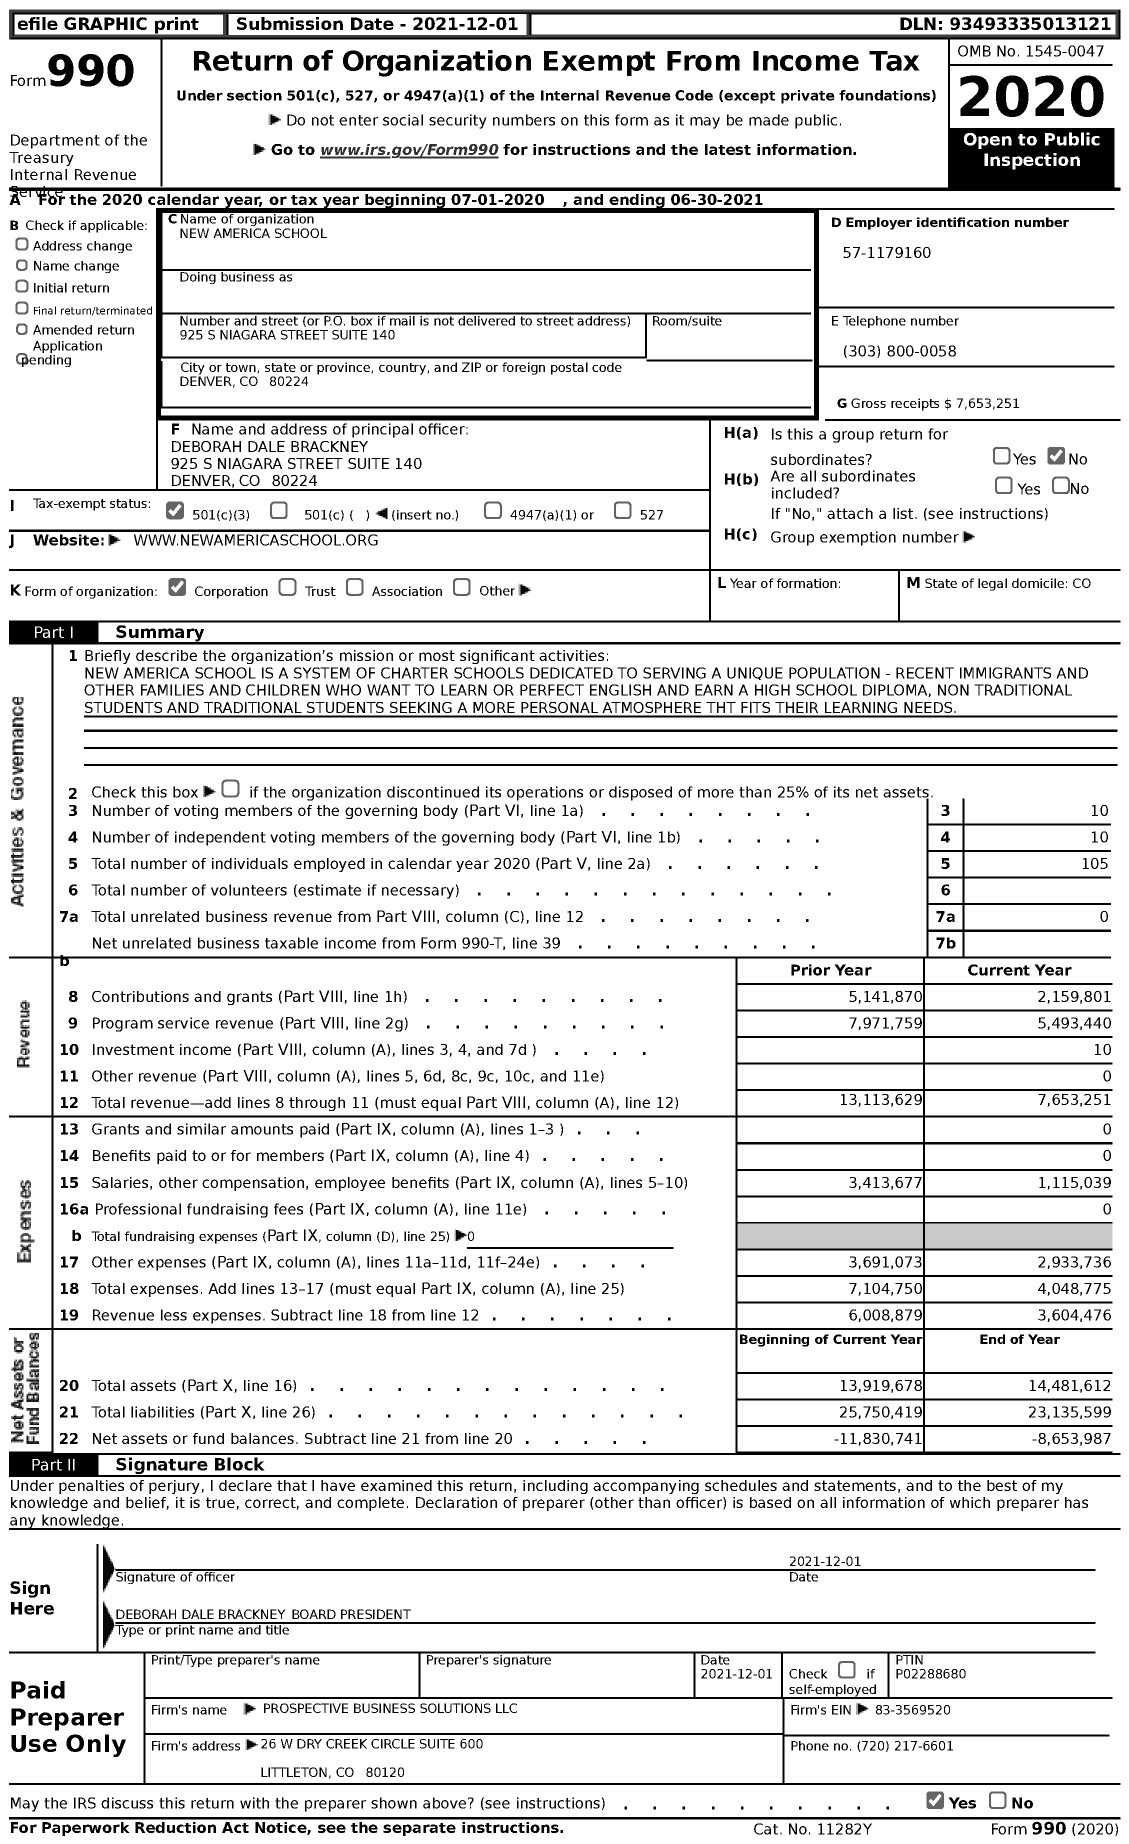 Image of first page of 2020 Form 990 for New America School (NAS)